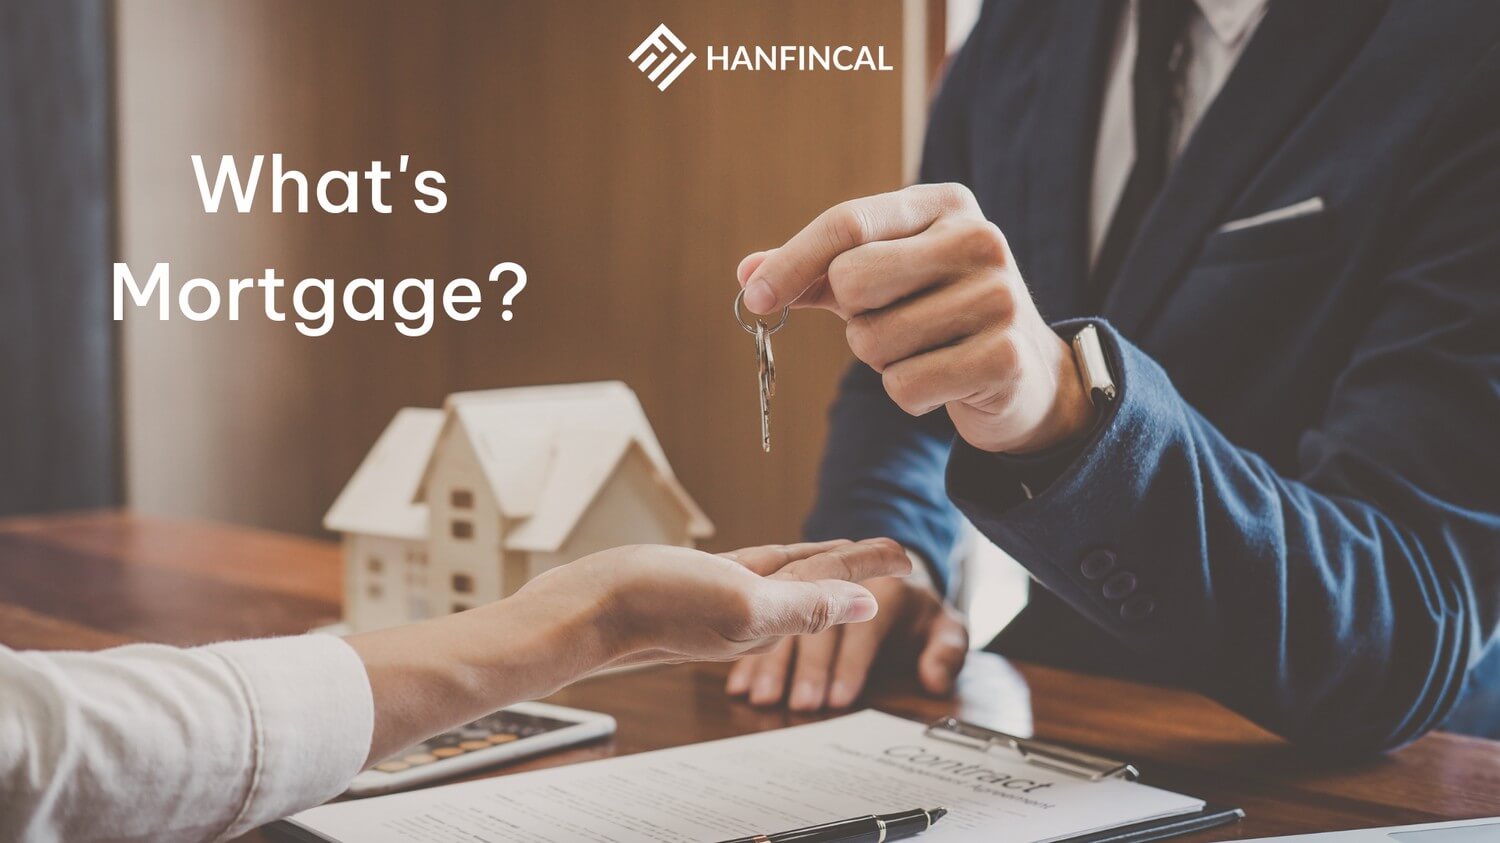 What’s Mortgage?